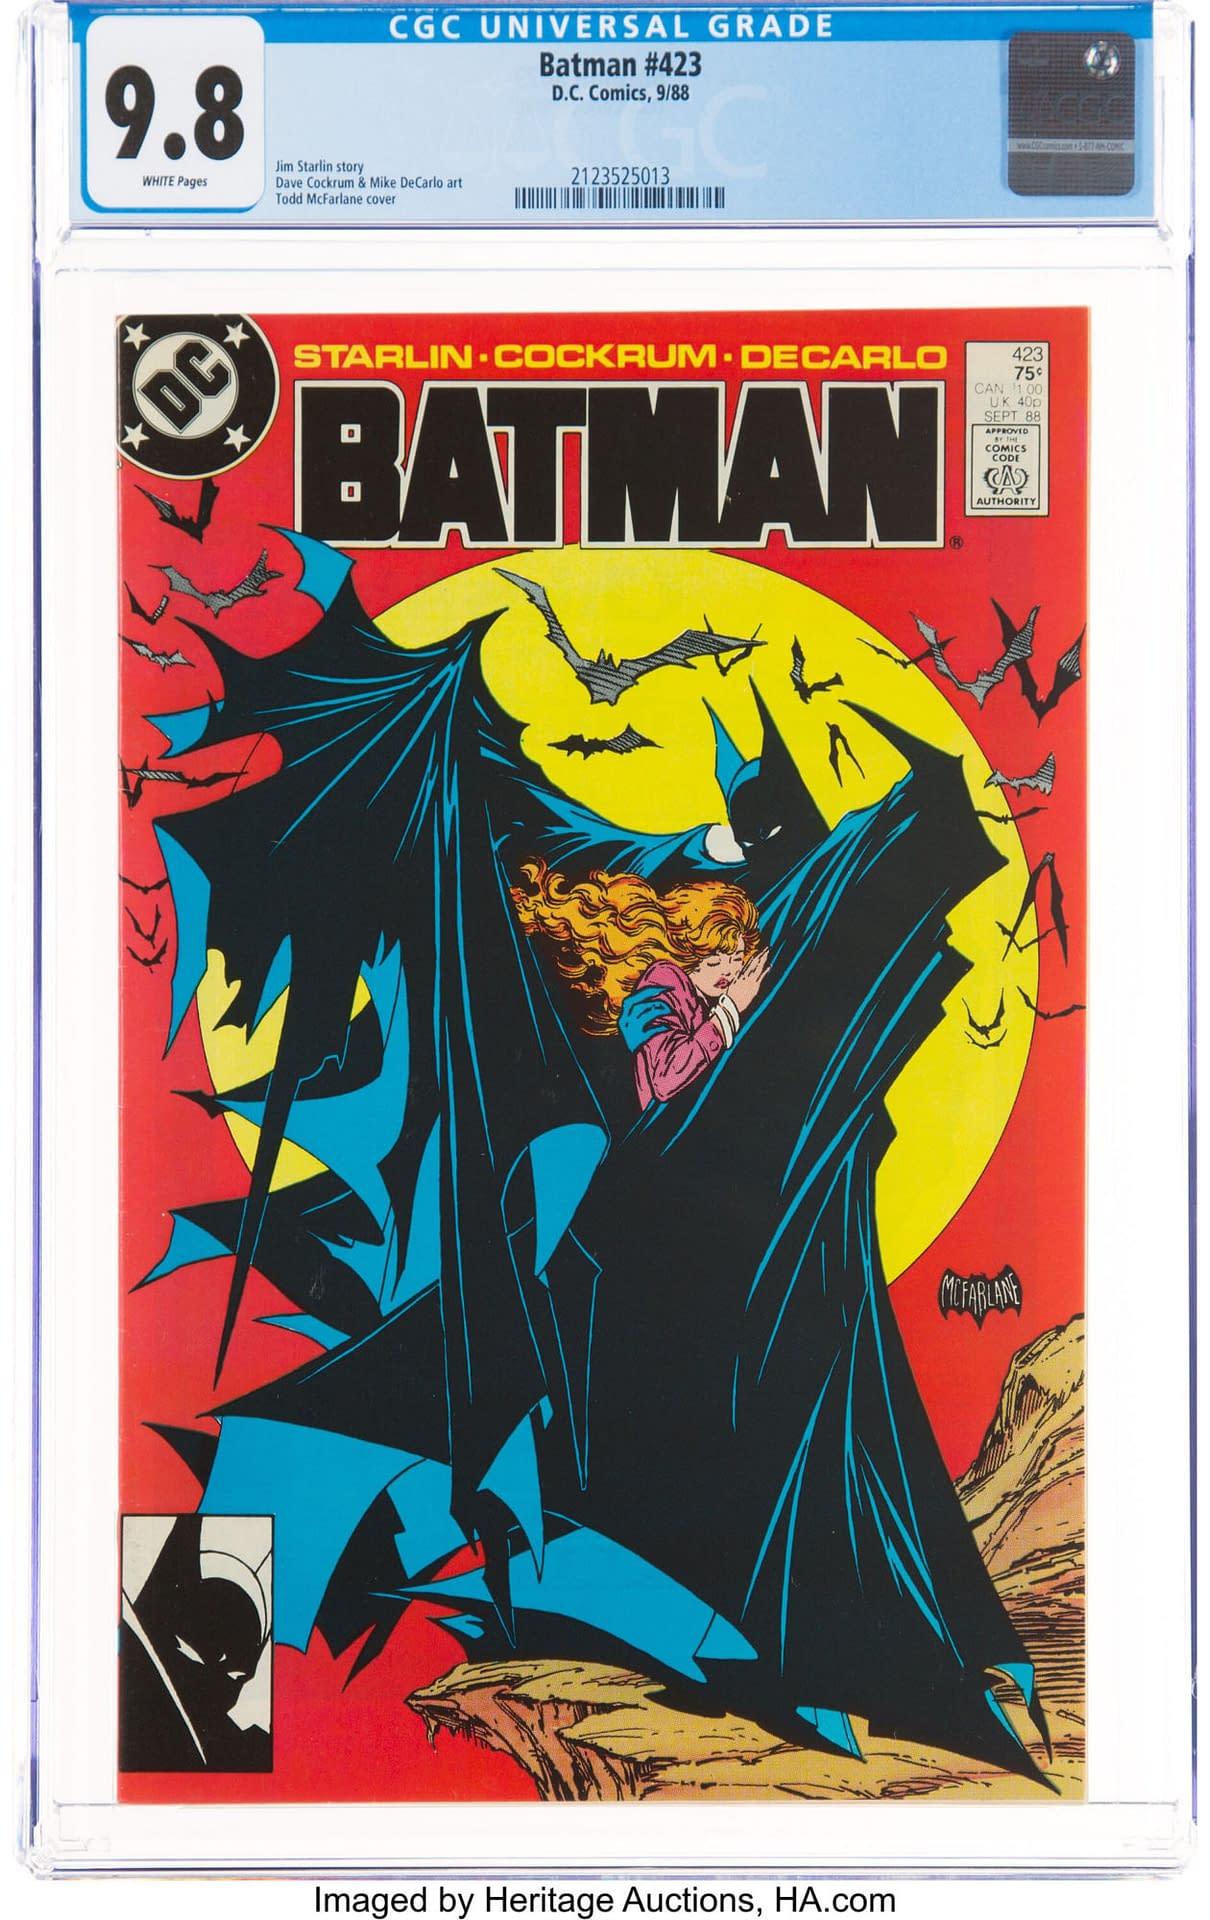 Batman #423 with Iconic Todd McFarlane Bat #Mood Cover Up for Auction